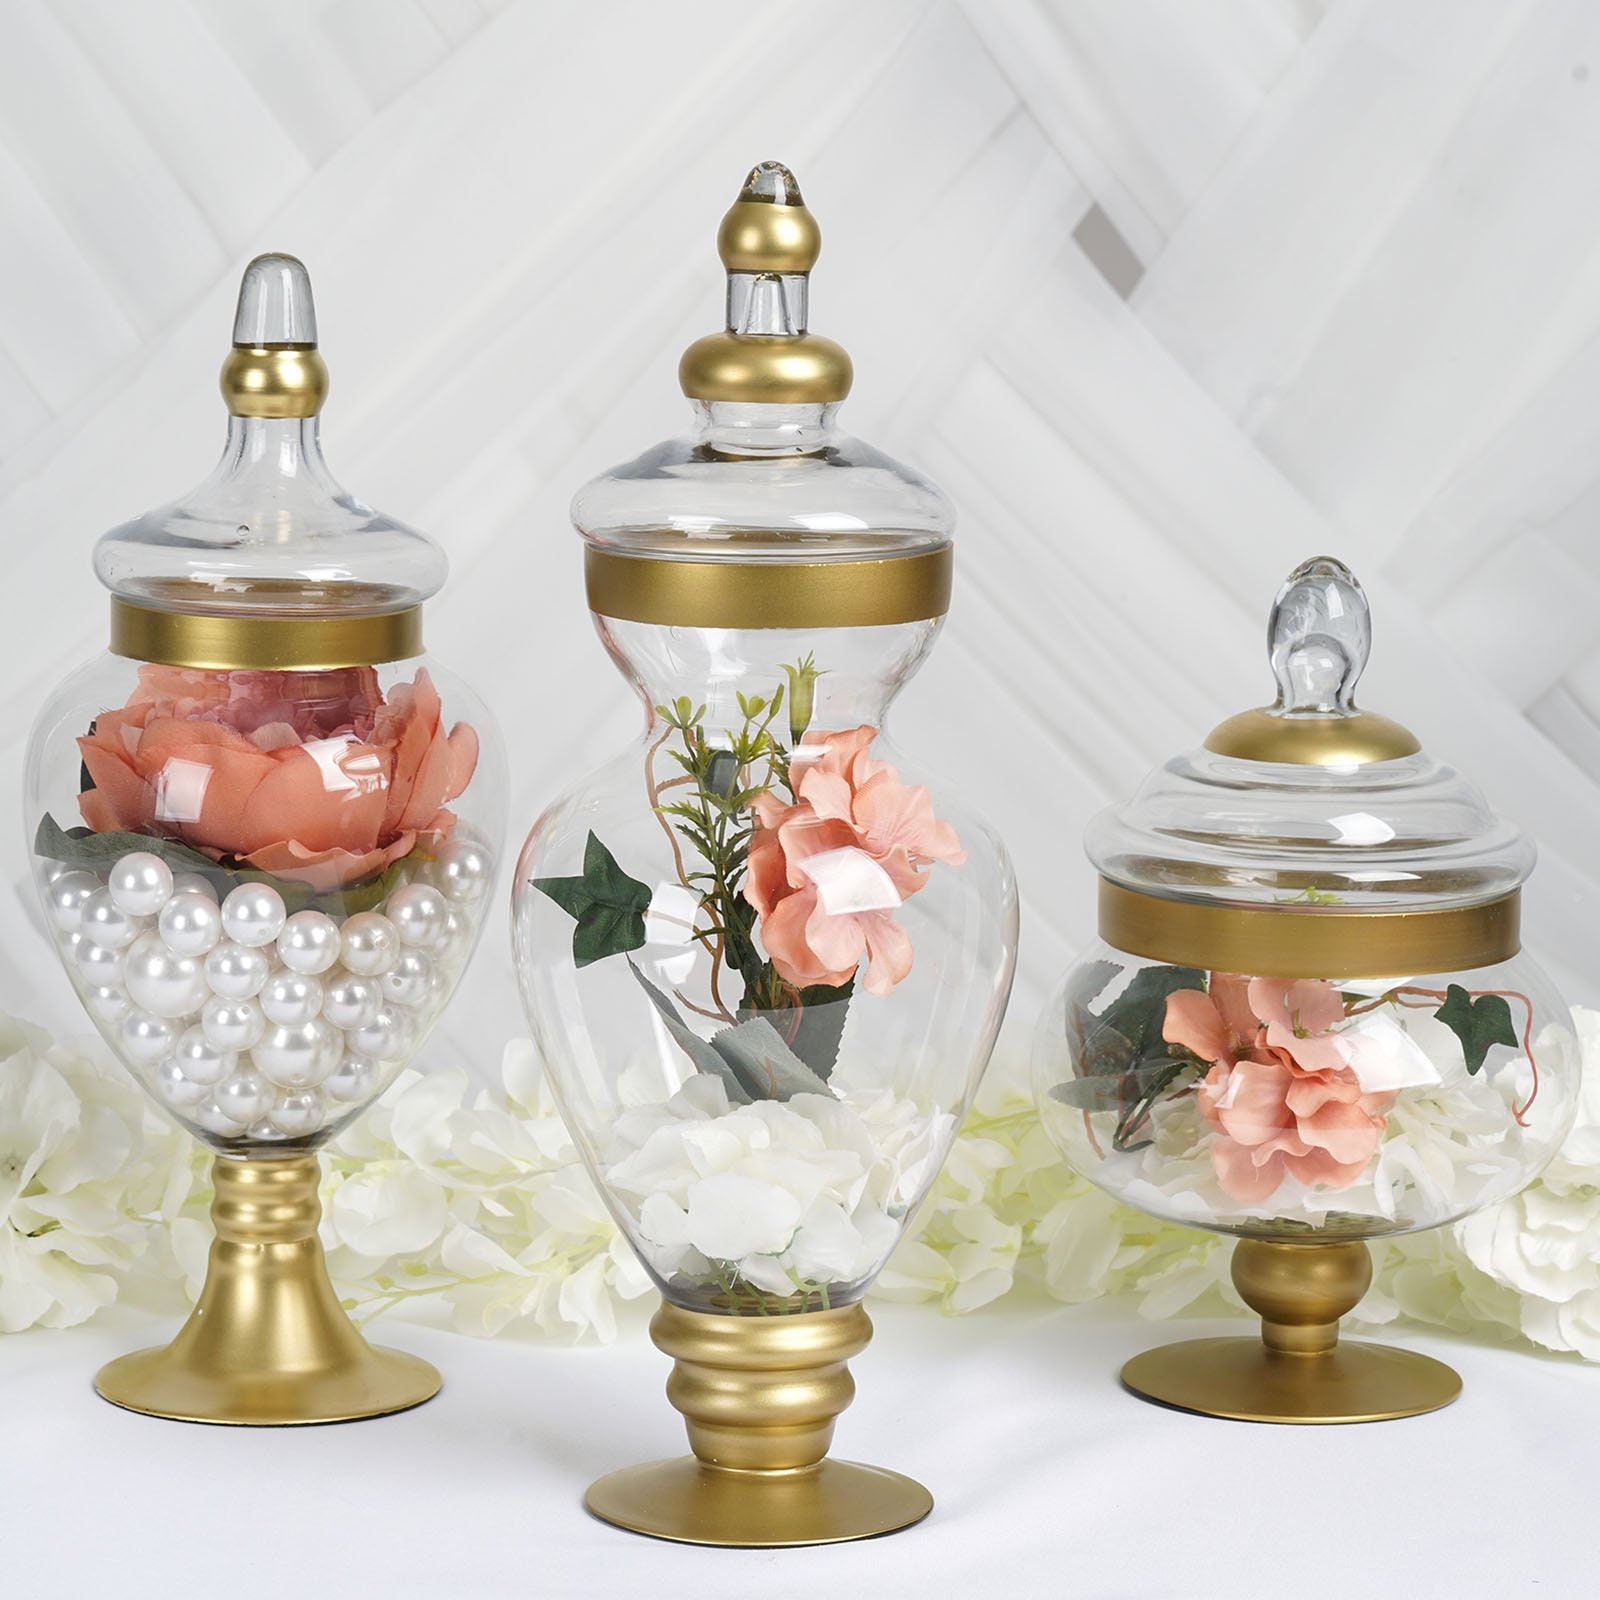 Diamond Star Set of 3 Clear Glass Apothecary Jars Elegant Storage Jar with  Lid, Decorative Wedding Candy Organizer Canisters Home Decor Centerpieces